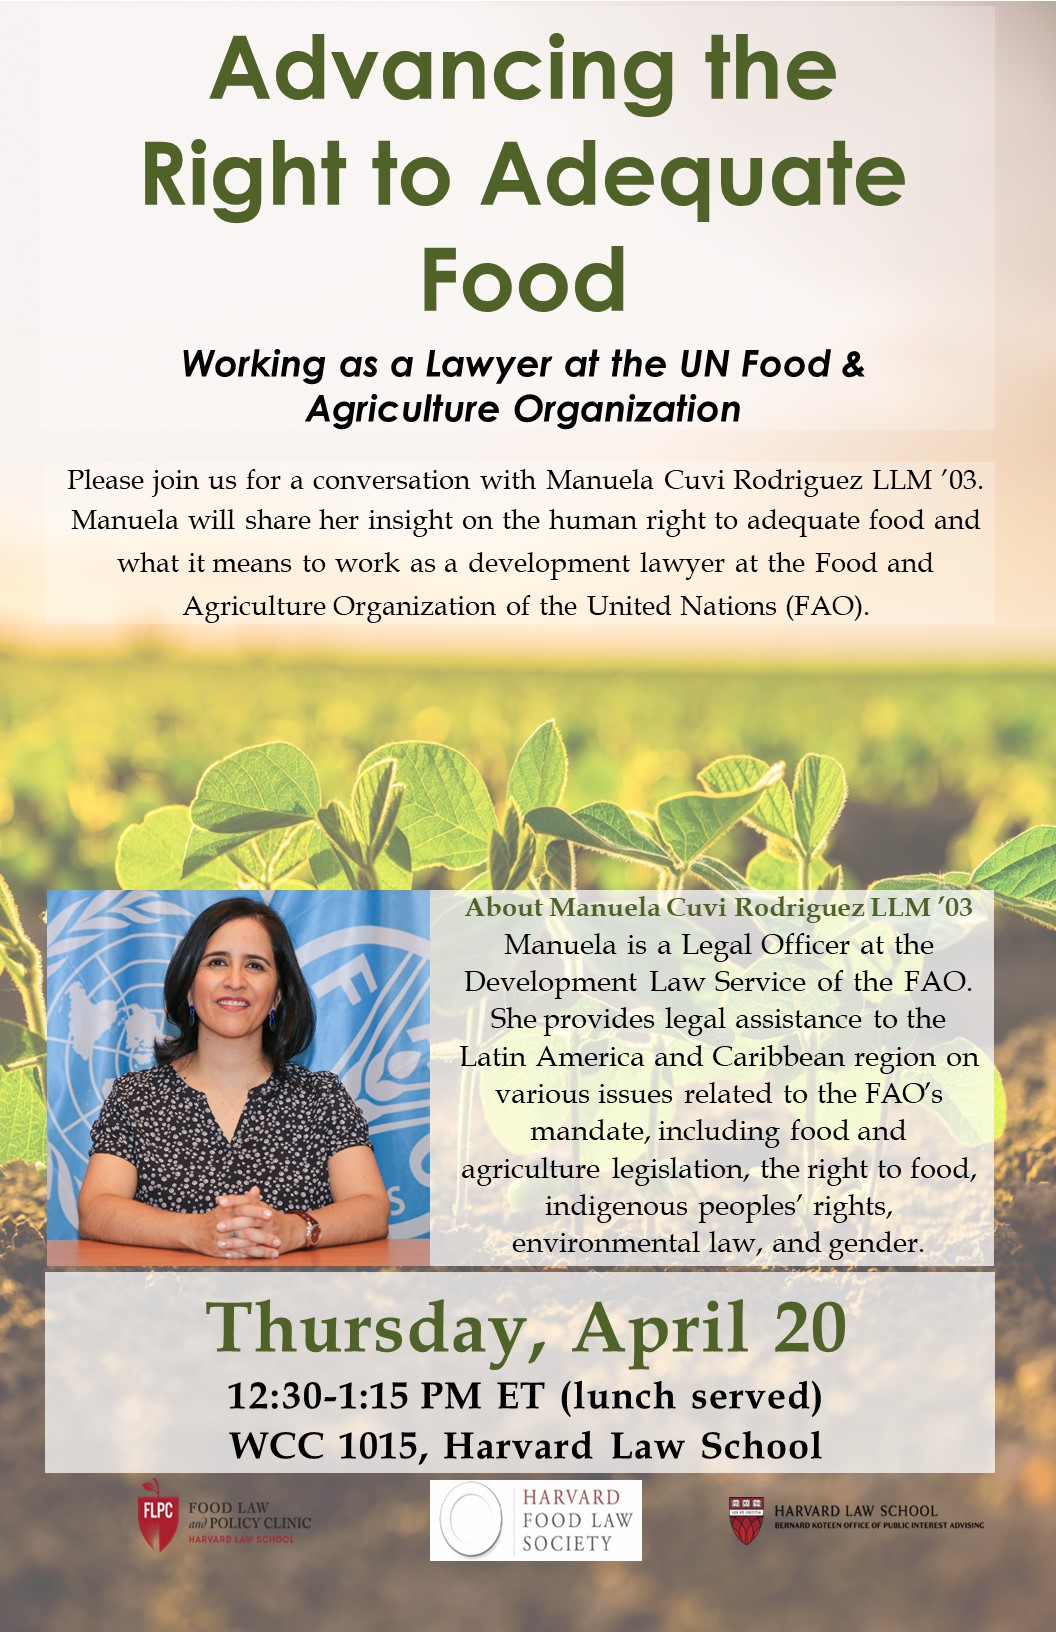 Description of event with picture of Manuela Cuvi Rodriguez, along with a background image of farm crops